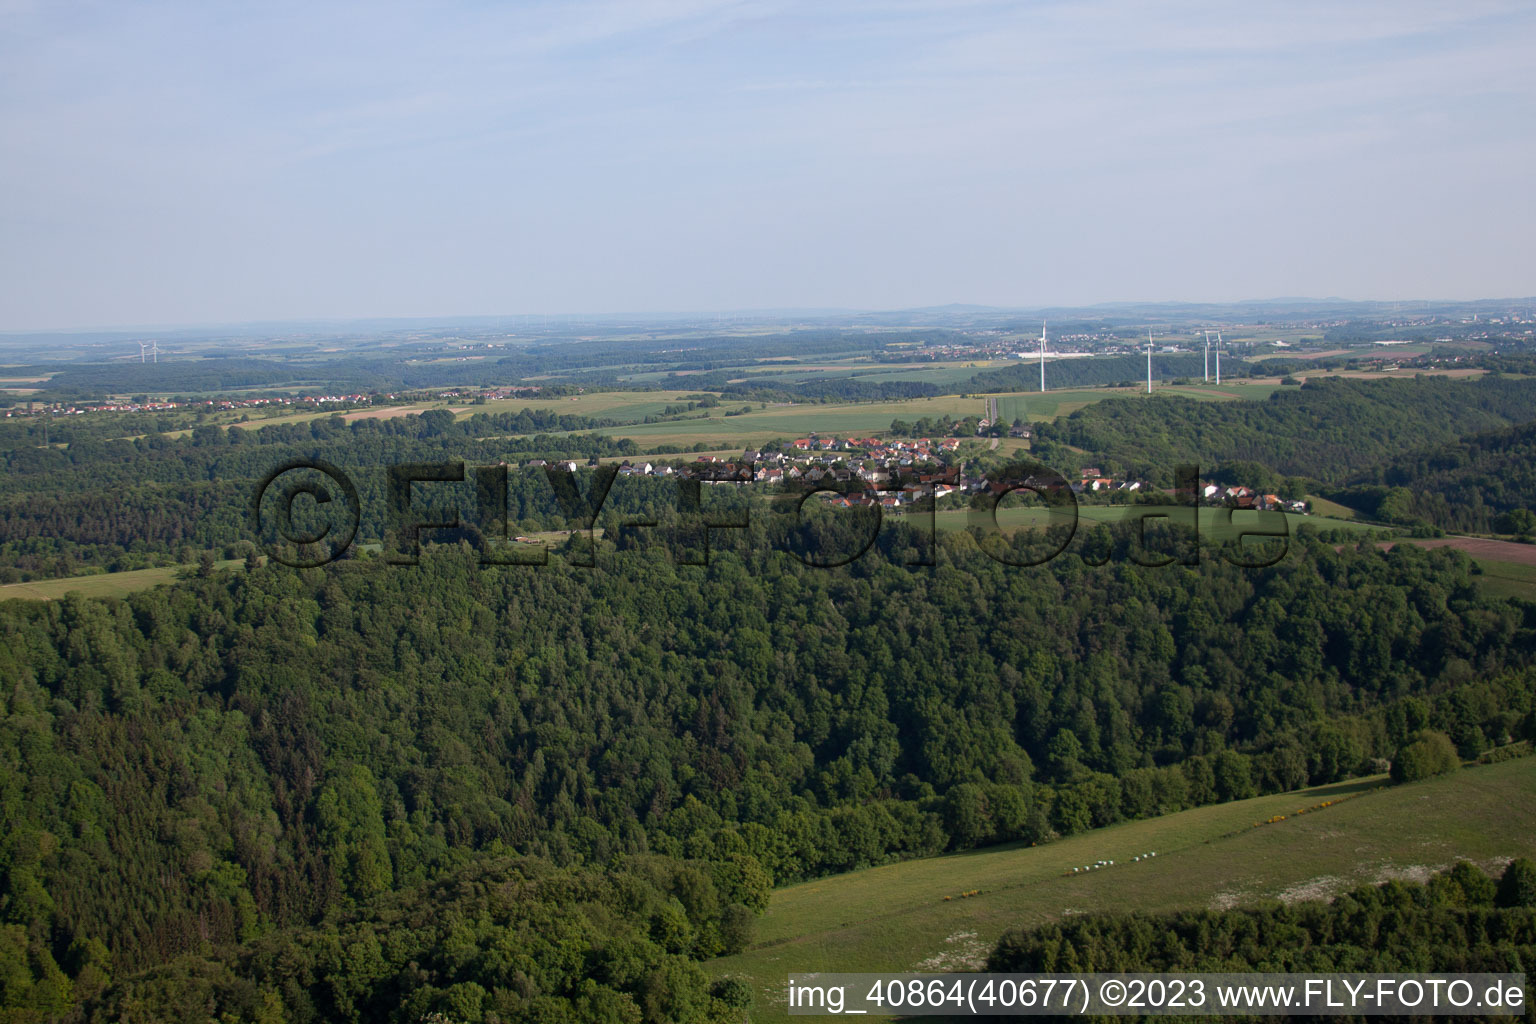 Vinningen in the state Rhineland-Palatinate, Germany out of the air